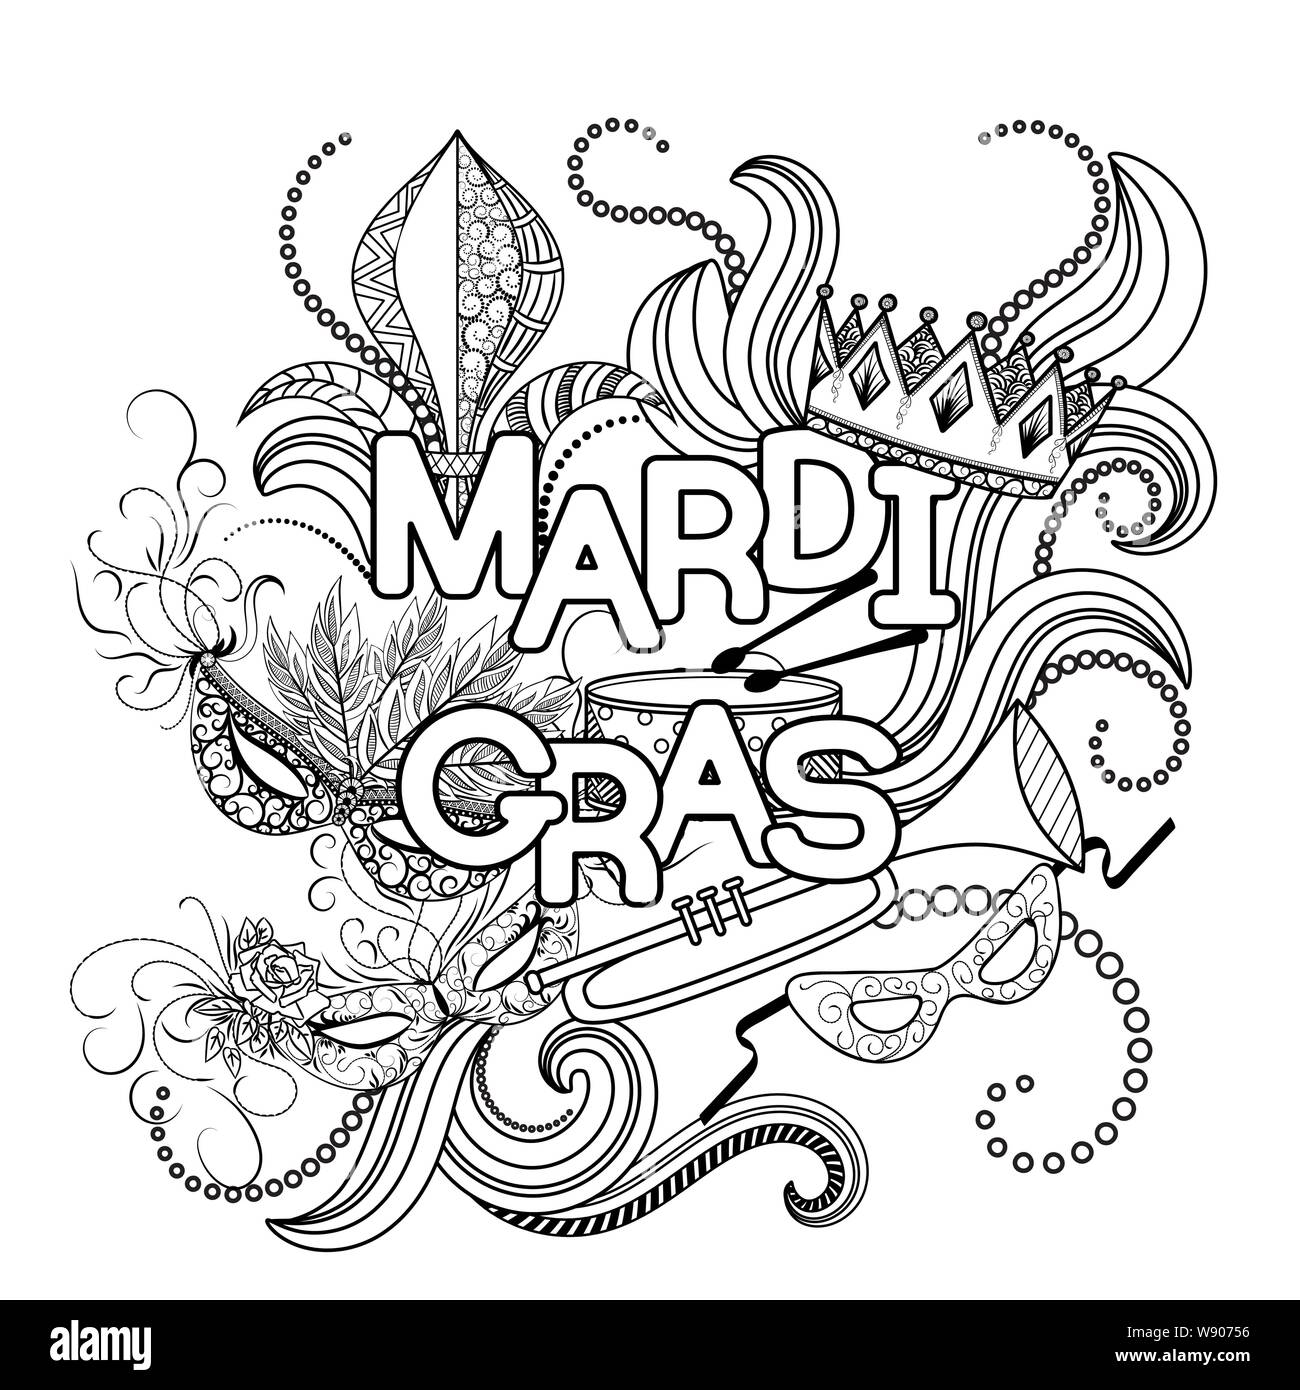 Mardi Gras or Shrove Tuesday. Carnival mask and hats, jester's hat, crowns, fleur de lis, feathers and ribbons. Vector illustration. Coloring page for adult coloring book. Stock Vector